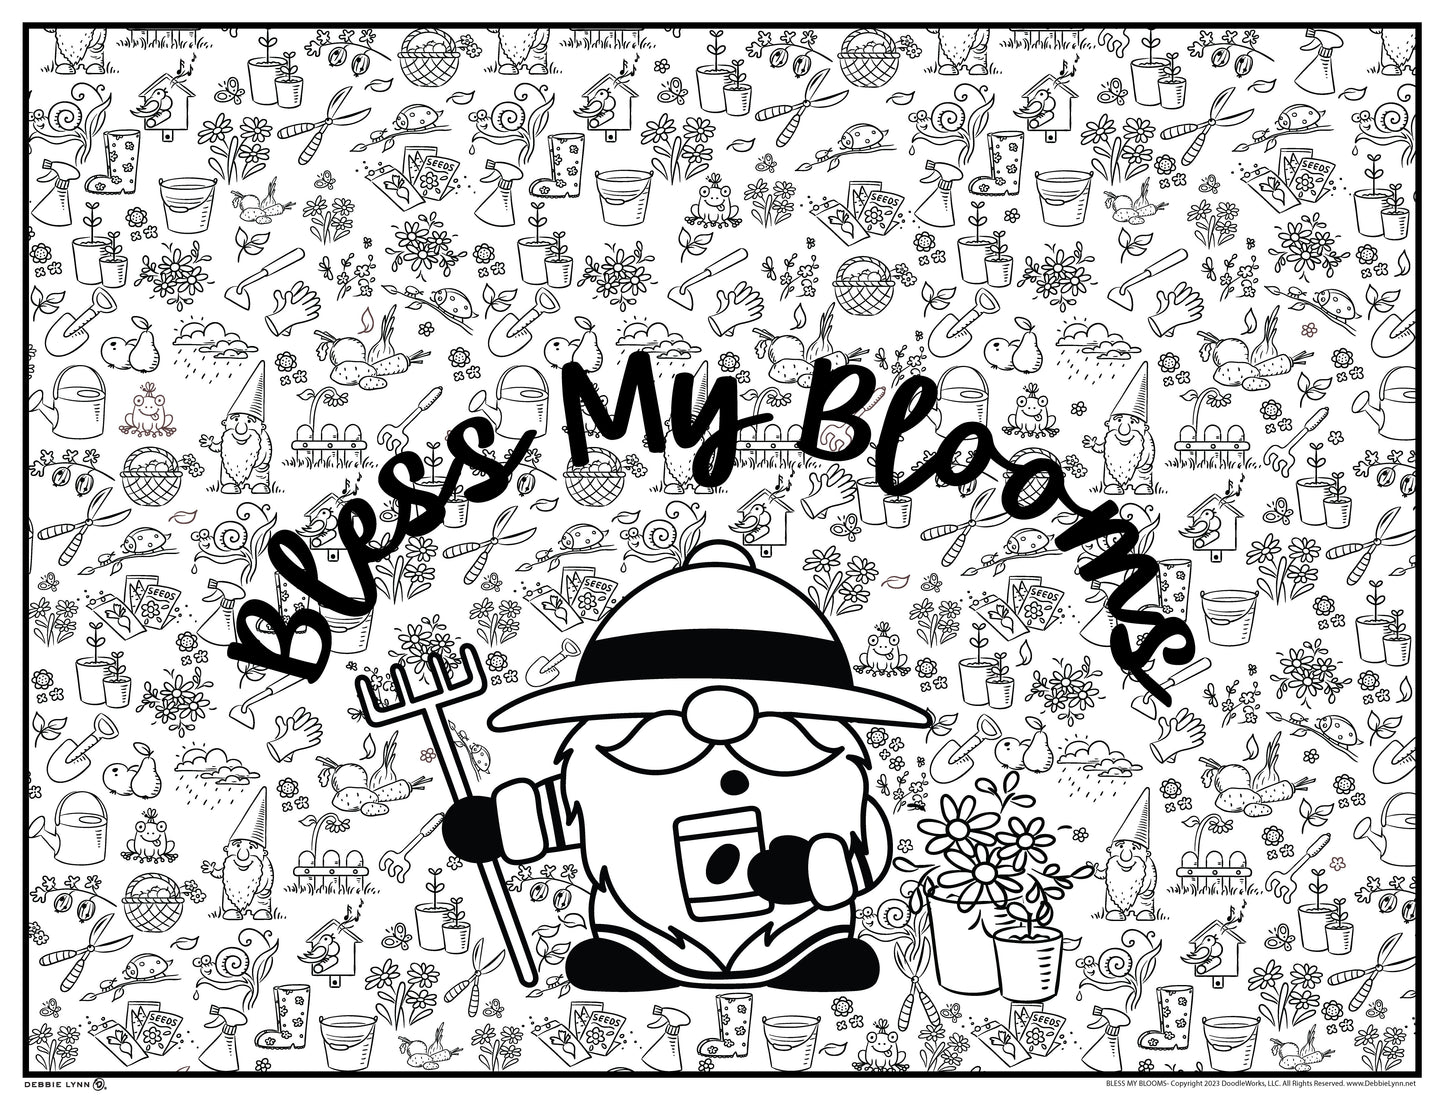 Bless My Blooms Personalized Giant Coloring Poster 46"x60"